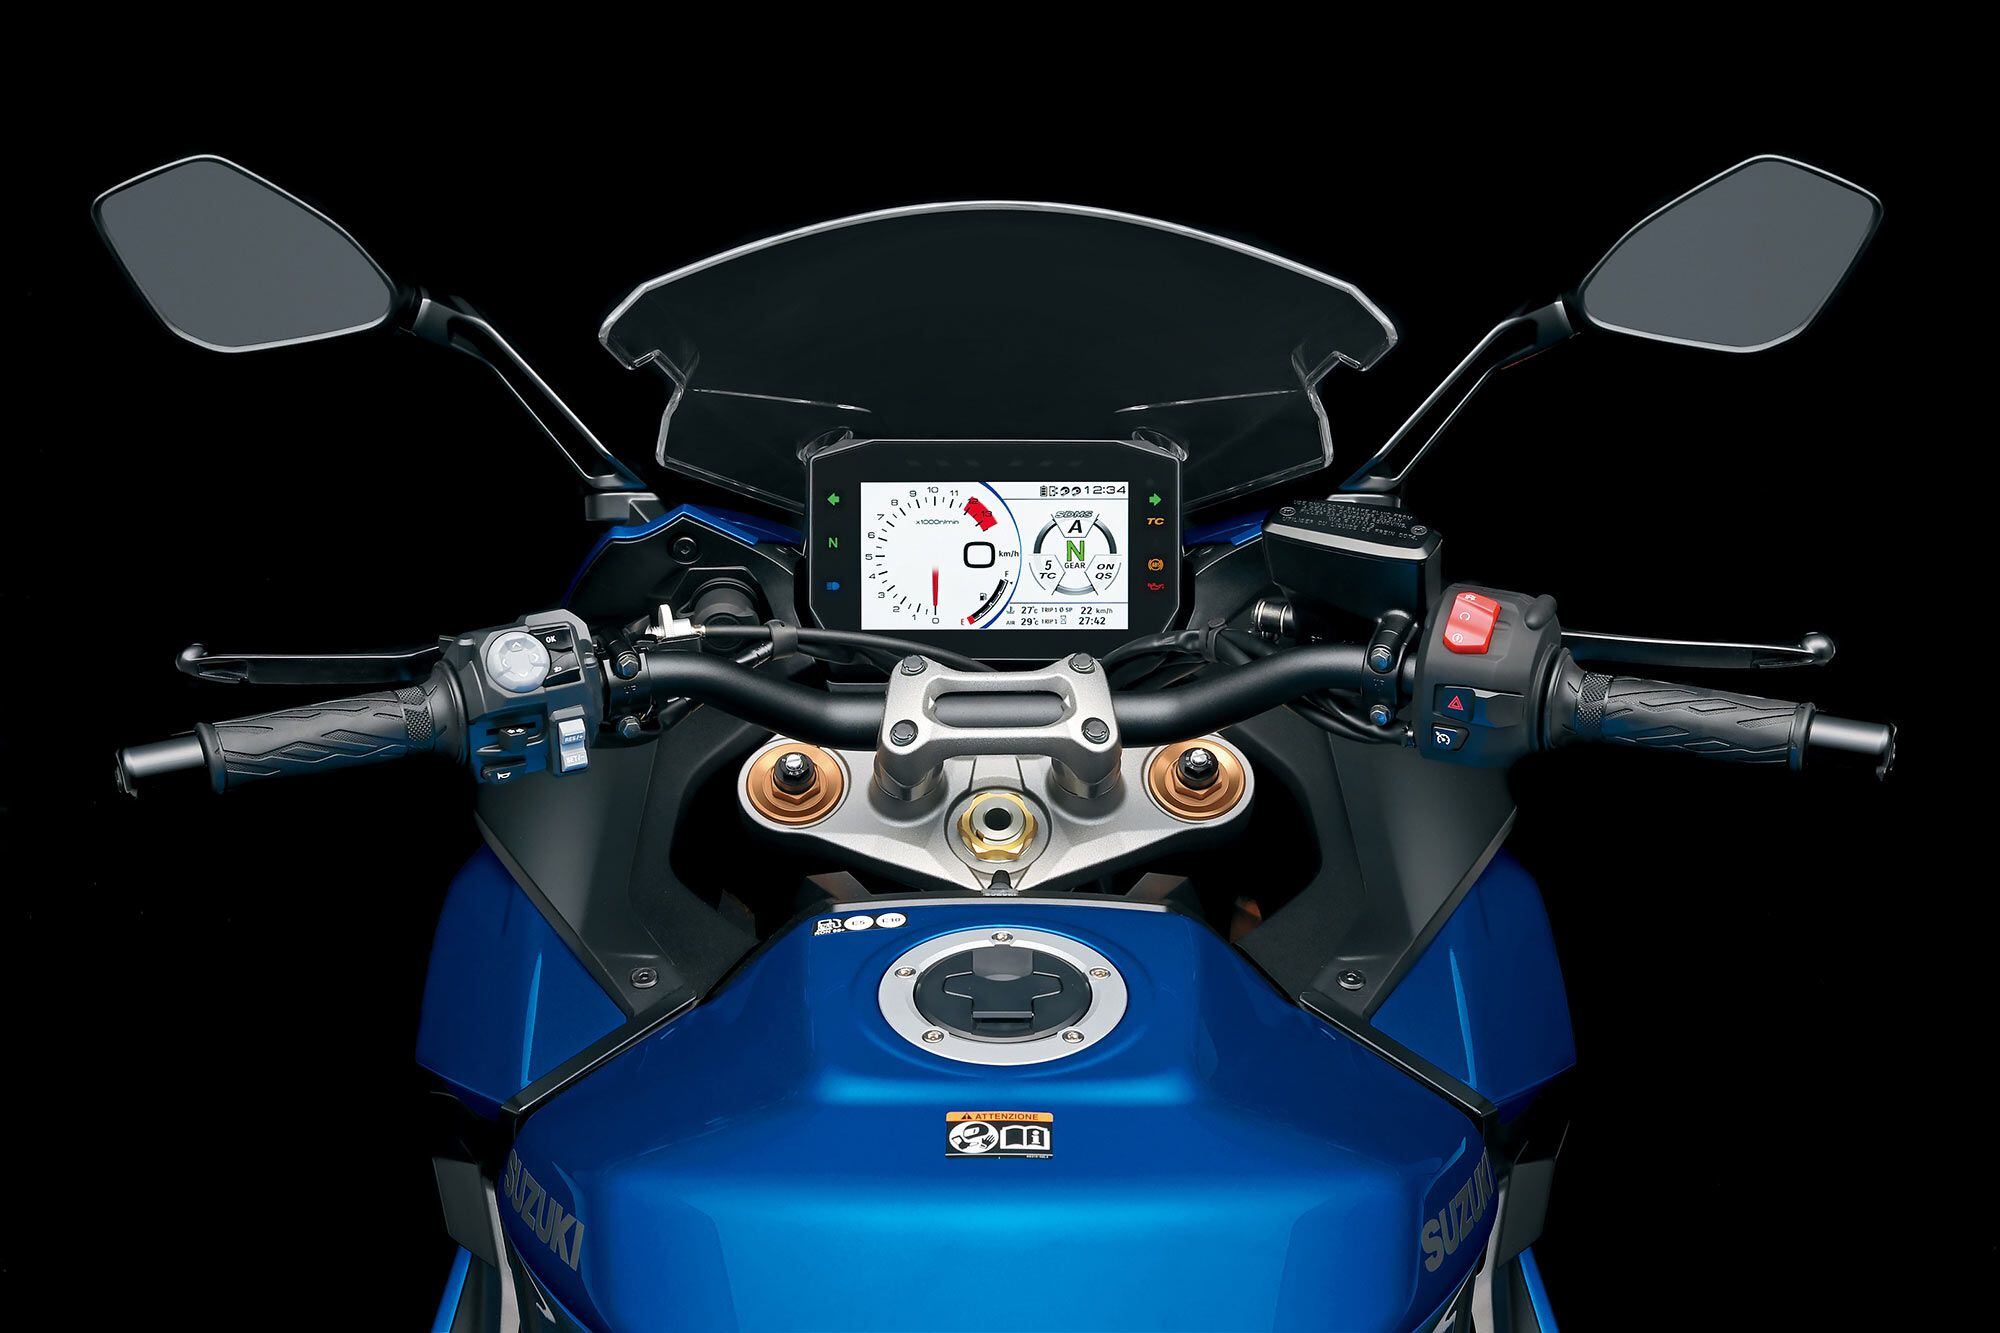 A brand-new TFT display is the focus of the cockpit, and can support smartphone connectivity. New cast aluminum handlebar is rubber mounted to dampen vibes.